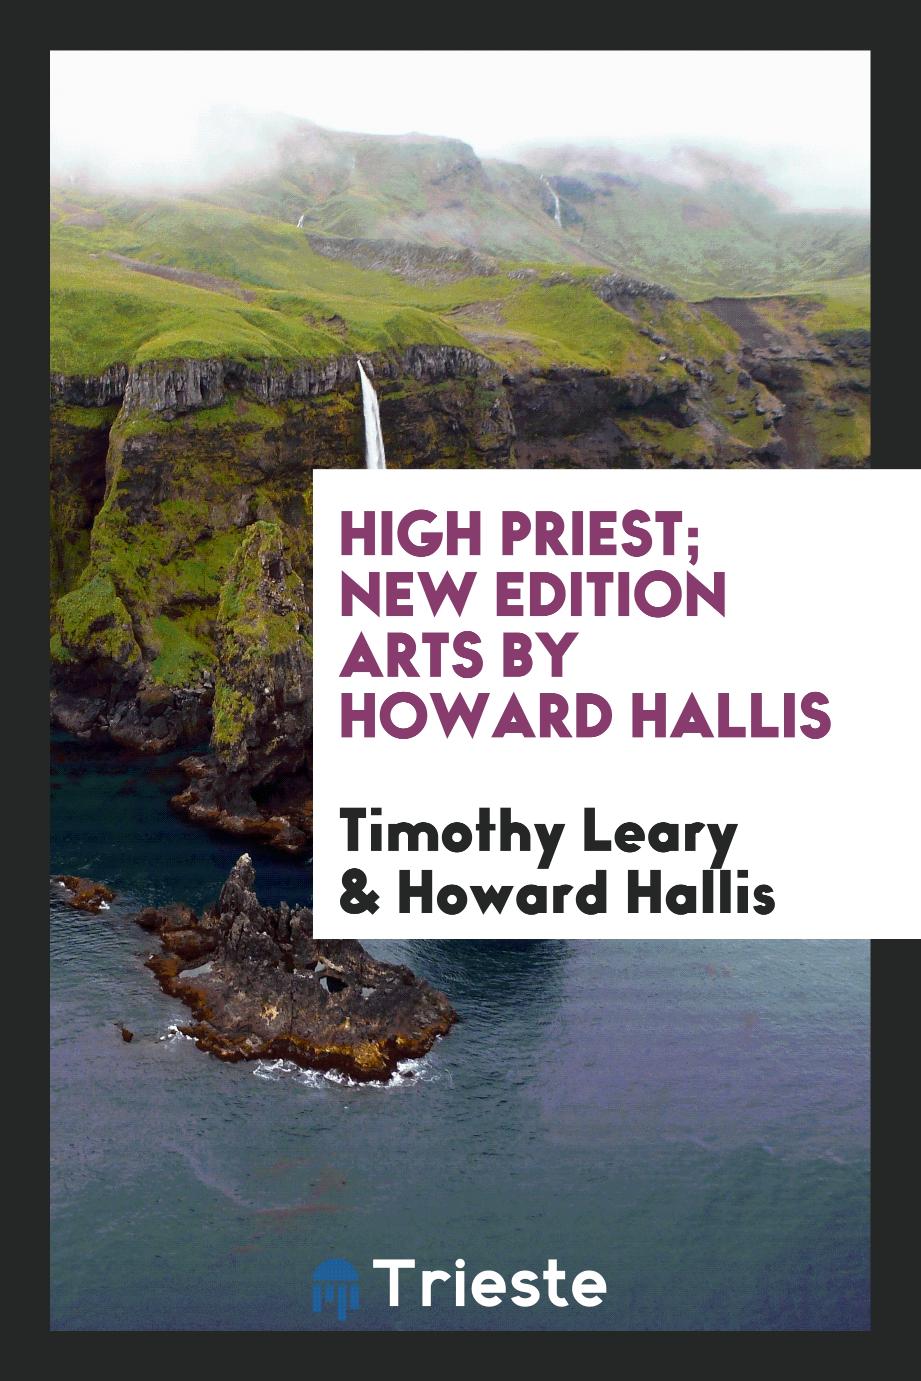 High Priest; New Edition Arts by Howard Hallis